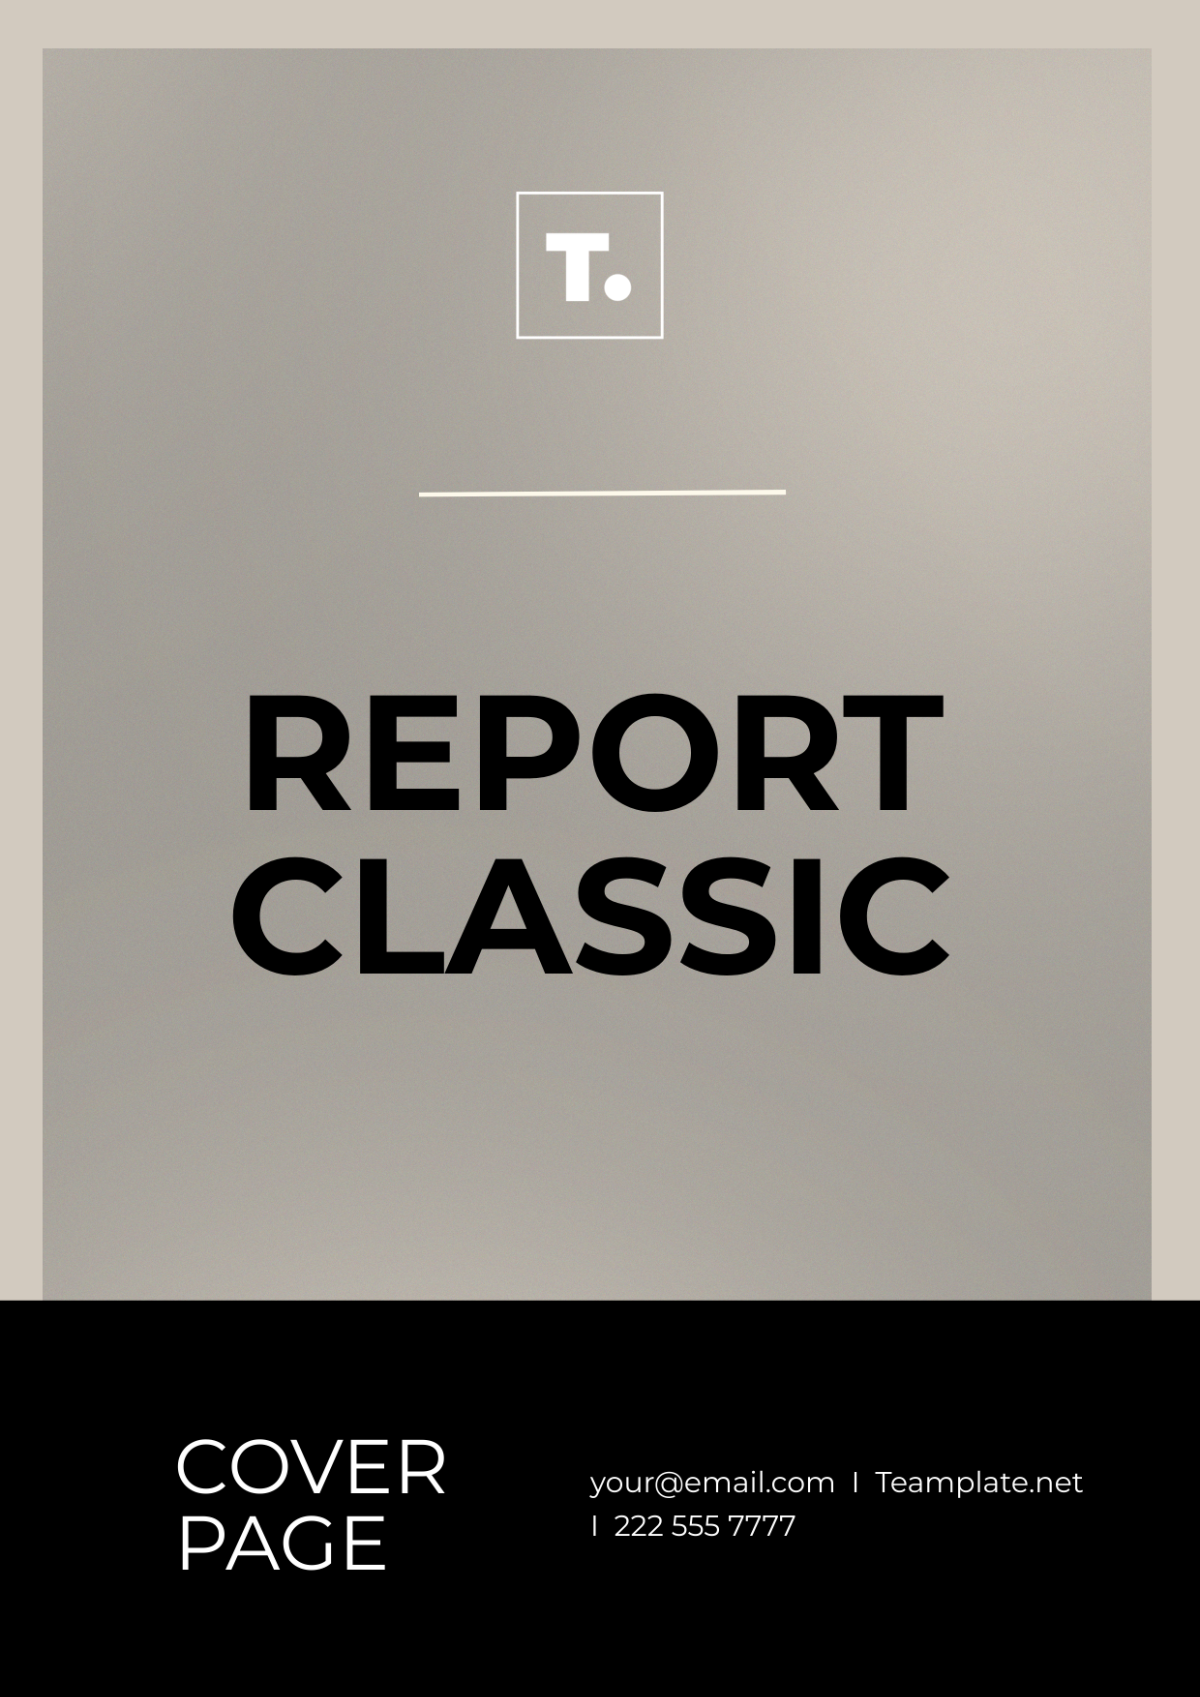 Report Classic Cover Page Template